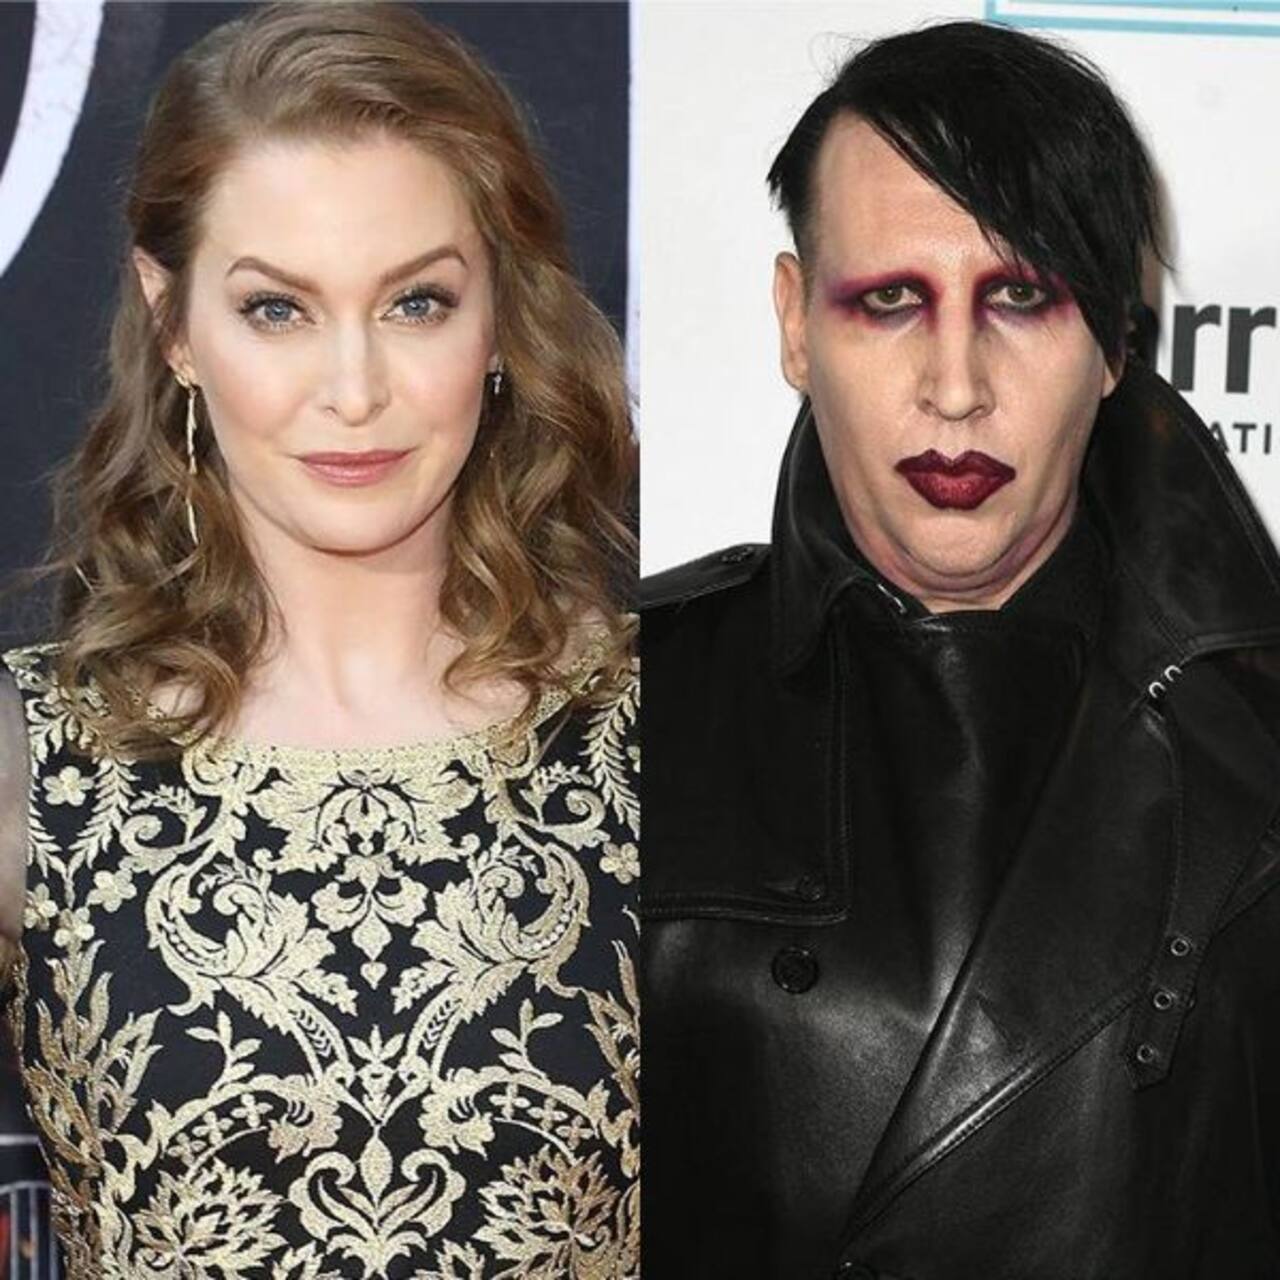 After Evan Rachel Wood, GoT fame Esmé Bianco accuses Marilyn Manson of horrifying physical and sexual abuse